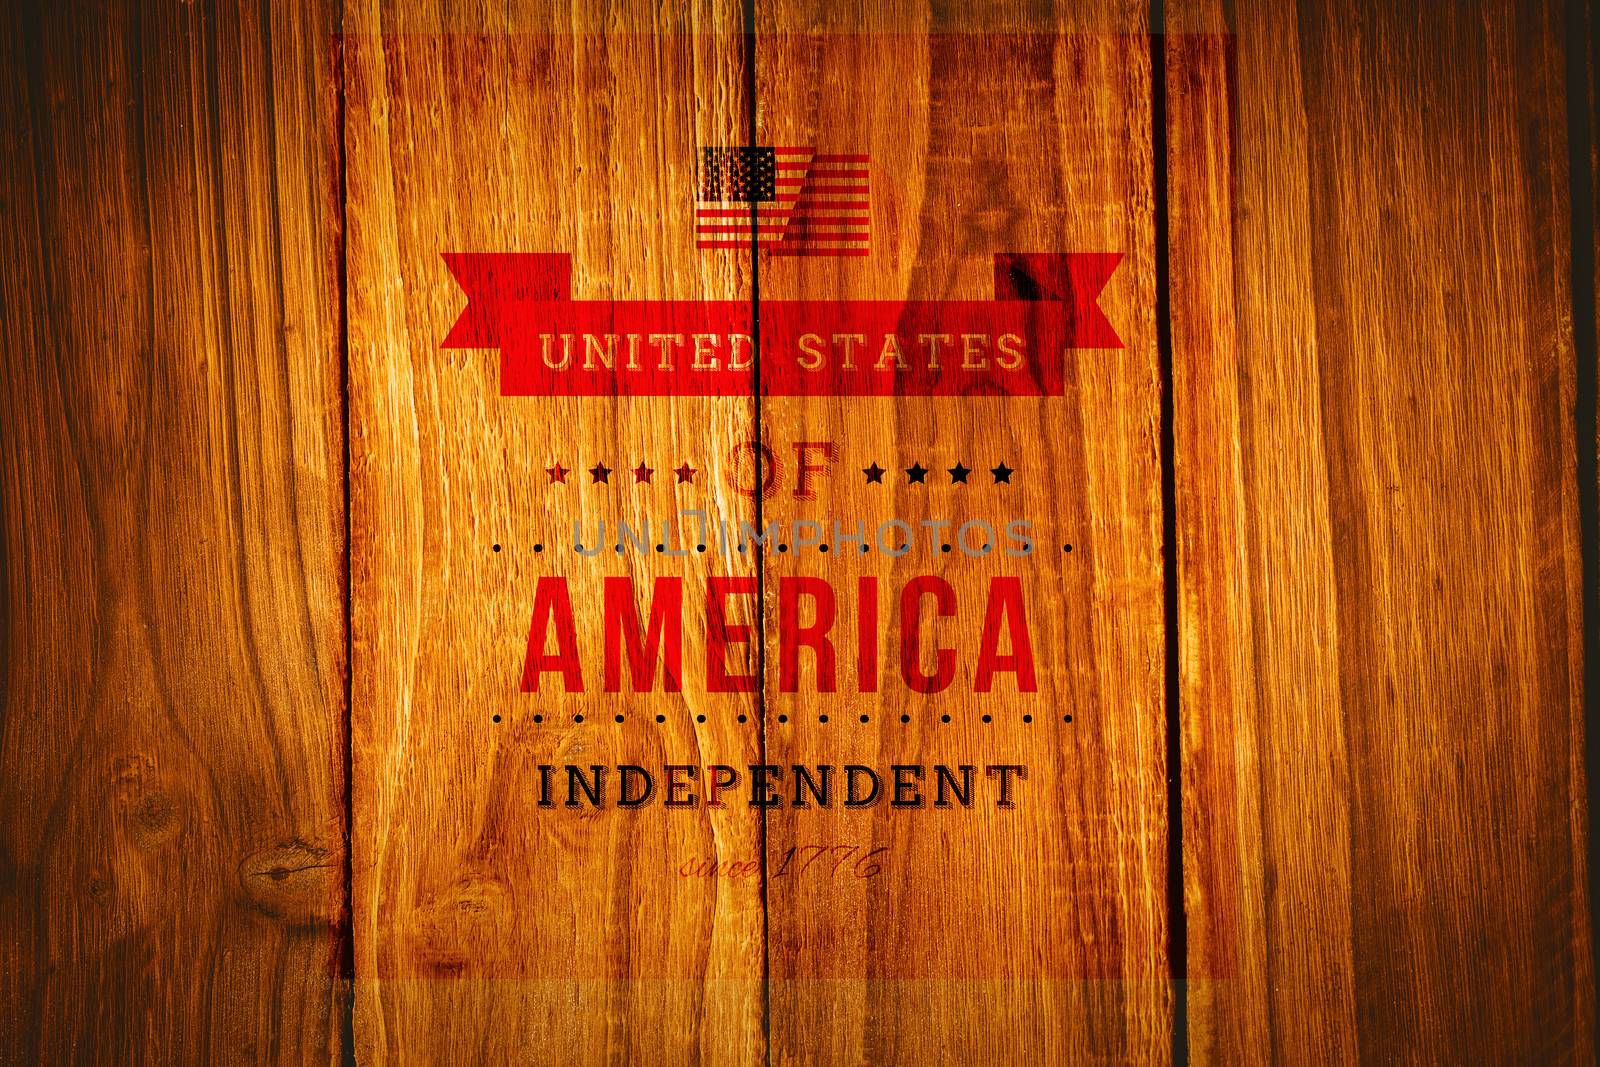 Independence day graphic against wooden table